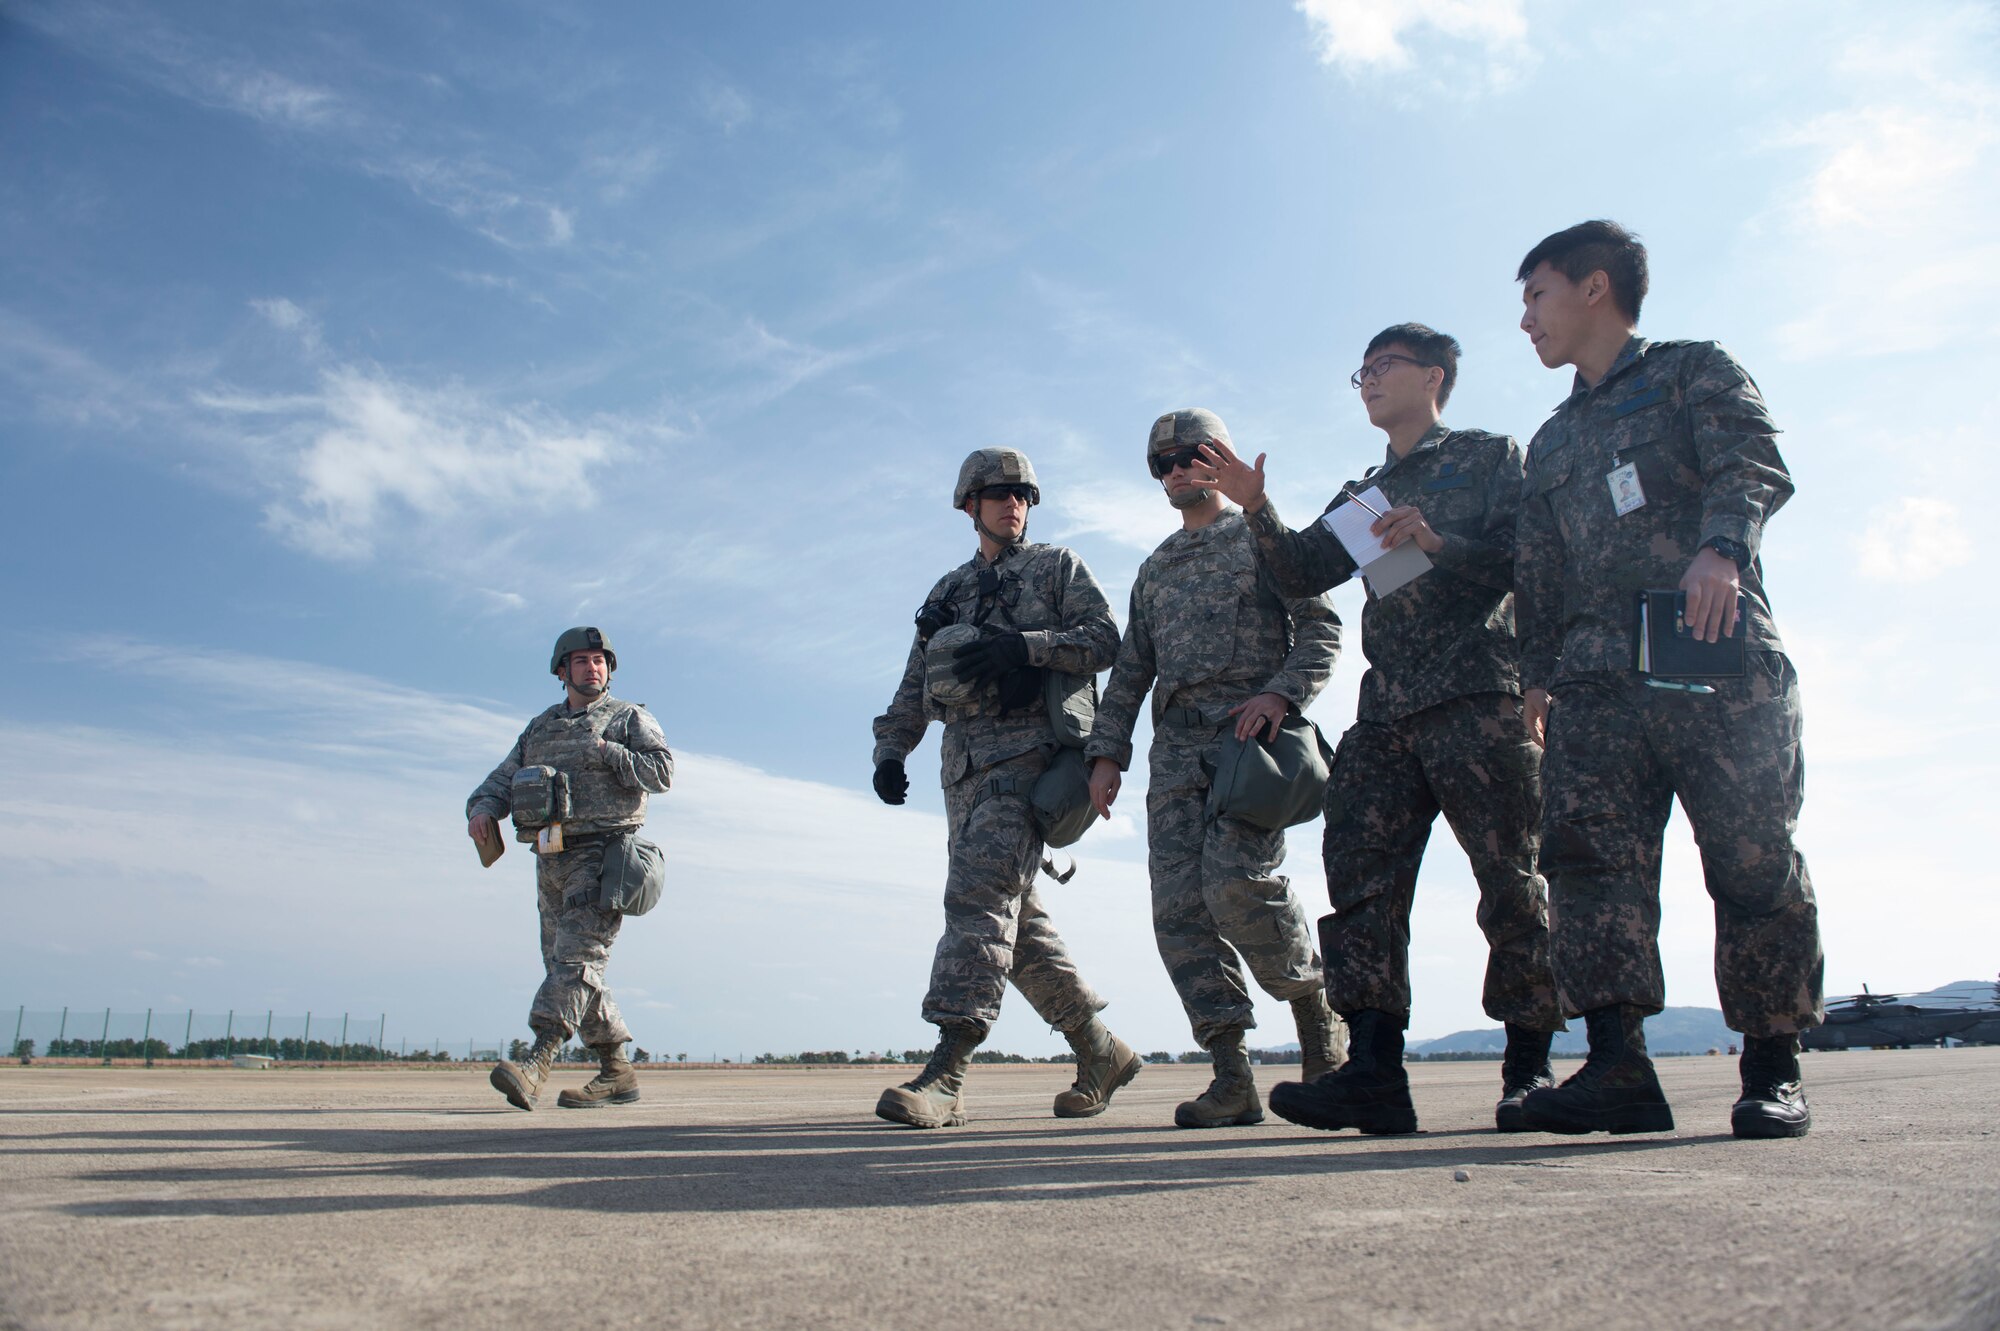 U.S. Air Force Airmen assigned to the 621st Contingency Response Wing stationed at Joint Base McGuire-Dix-Lakehurst, N.J., and Republic of Korea Air Force Airmen walk together to inspect the airfield to determine a parking plan for incoming aircraft during exercise Turbo Distribution 17-3, at Pohang Air Base, Republic of Korea, April 10, 2017. (U.S. Air Force photo by Tech. Sgt. Gustavo Gonzalez/RELEASED)